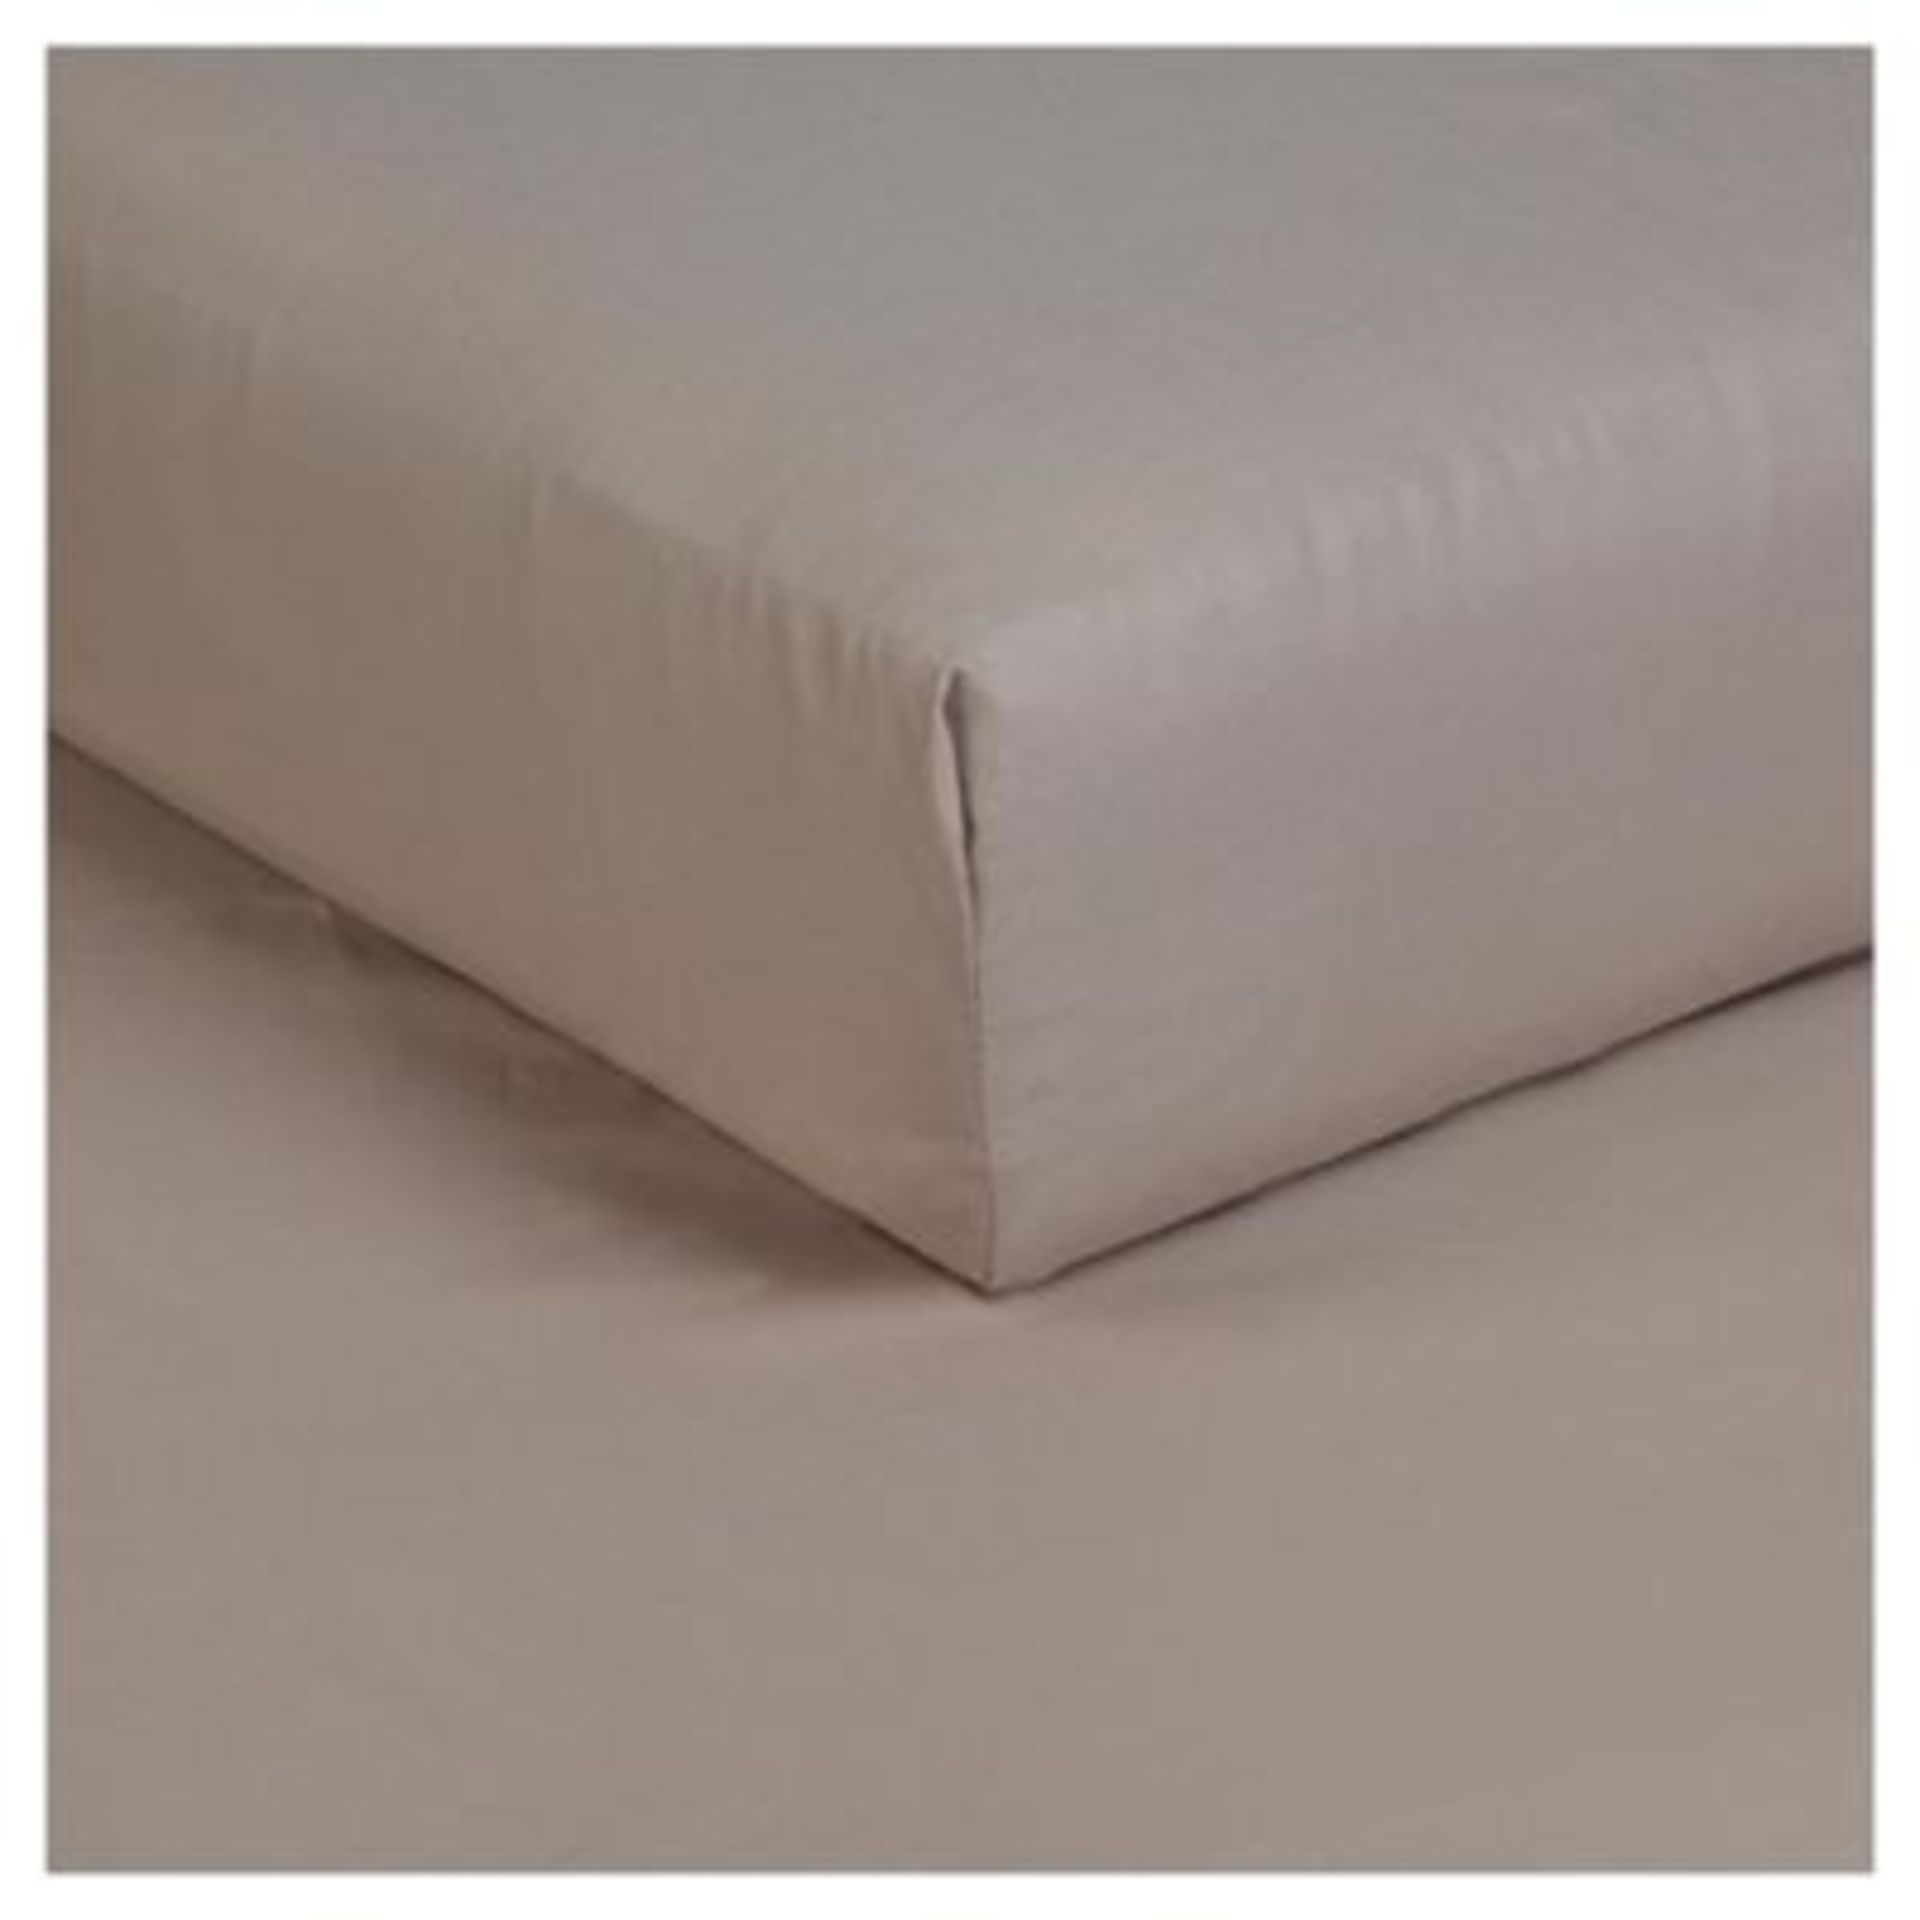 V Brand New Luxury Egyptian Cotton Percale King Size Fitted Sheet - Biscuit/Beige ISP £25.99